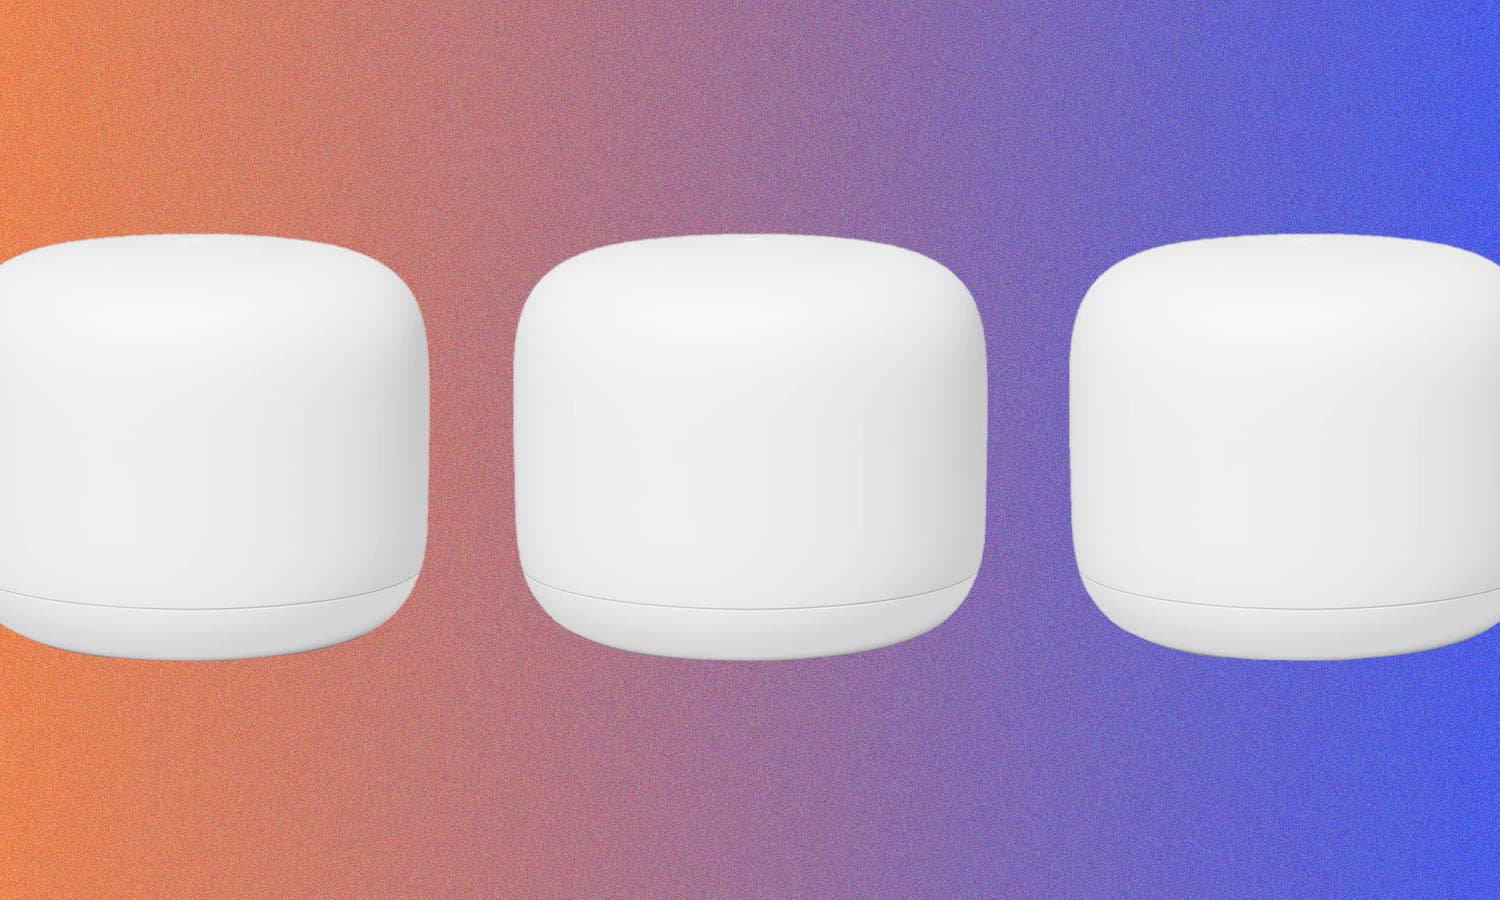 Three Google Nest Wifi Routers against an orange and blue background.